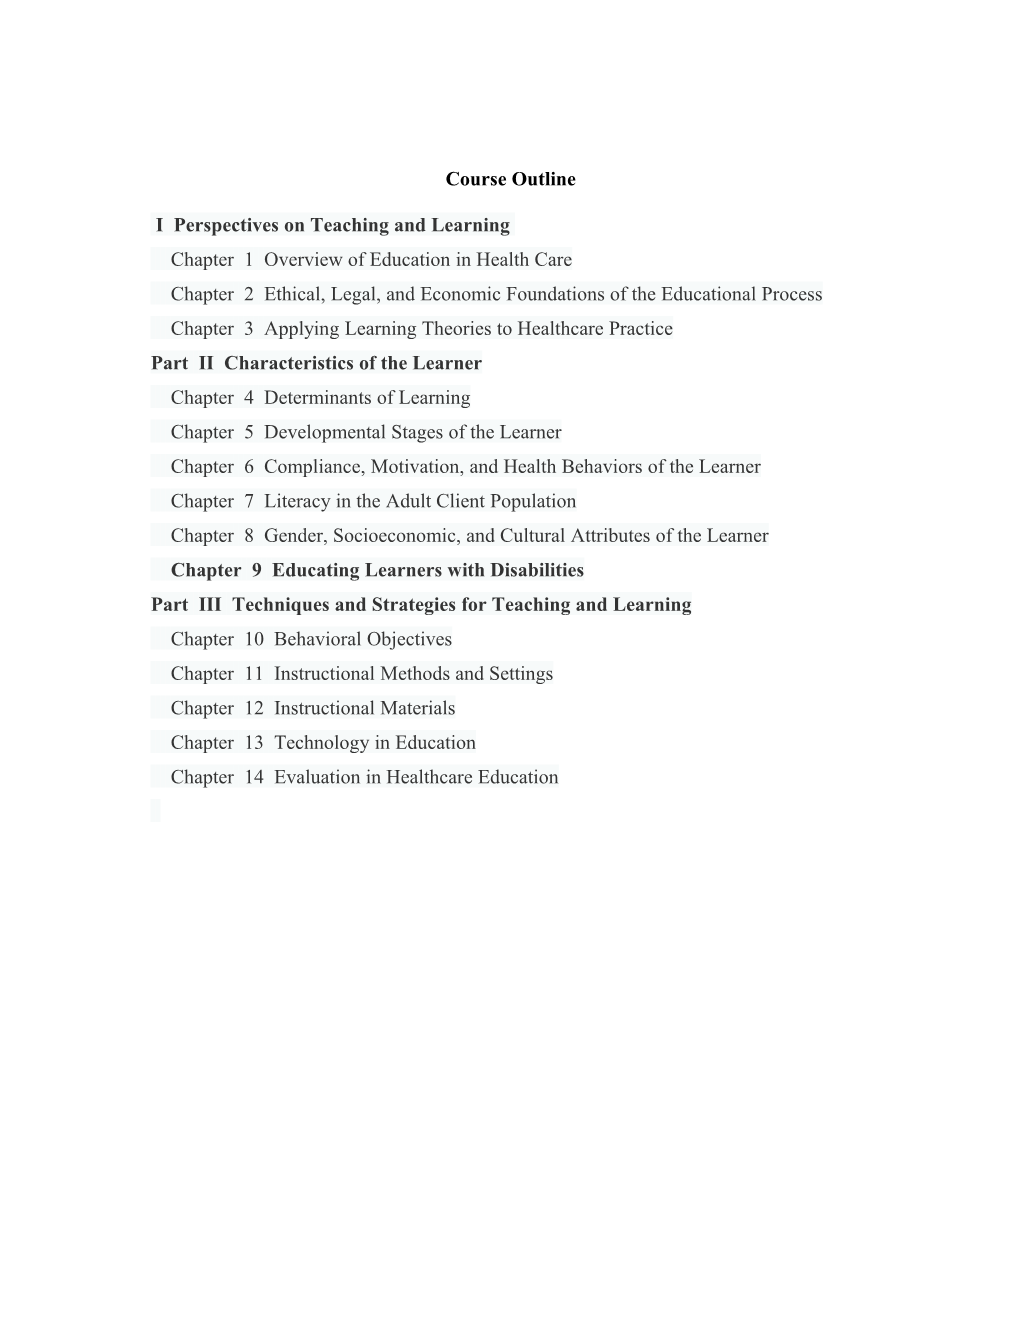 Course: NURS 5314 Applied Learning Theories in Nursing Education